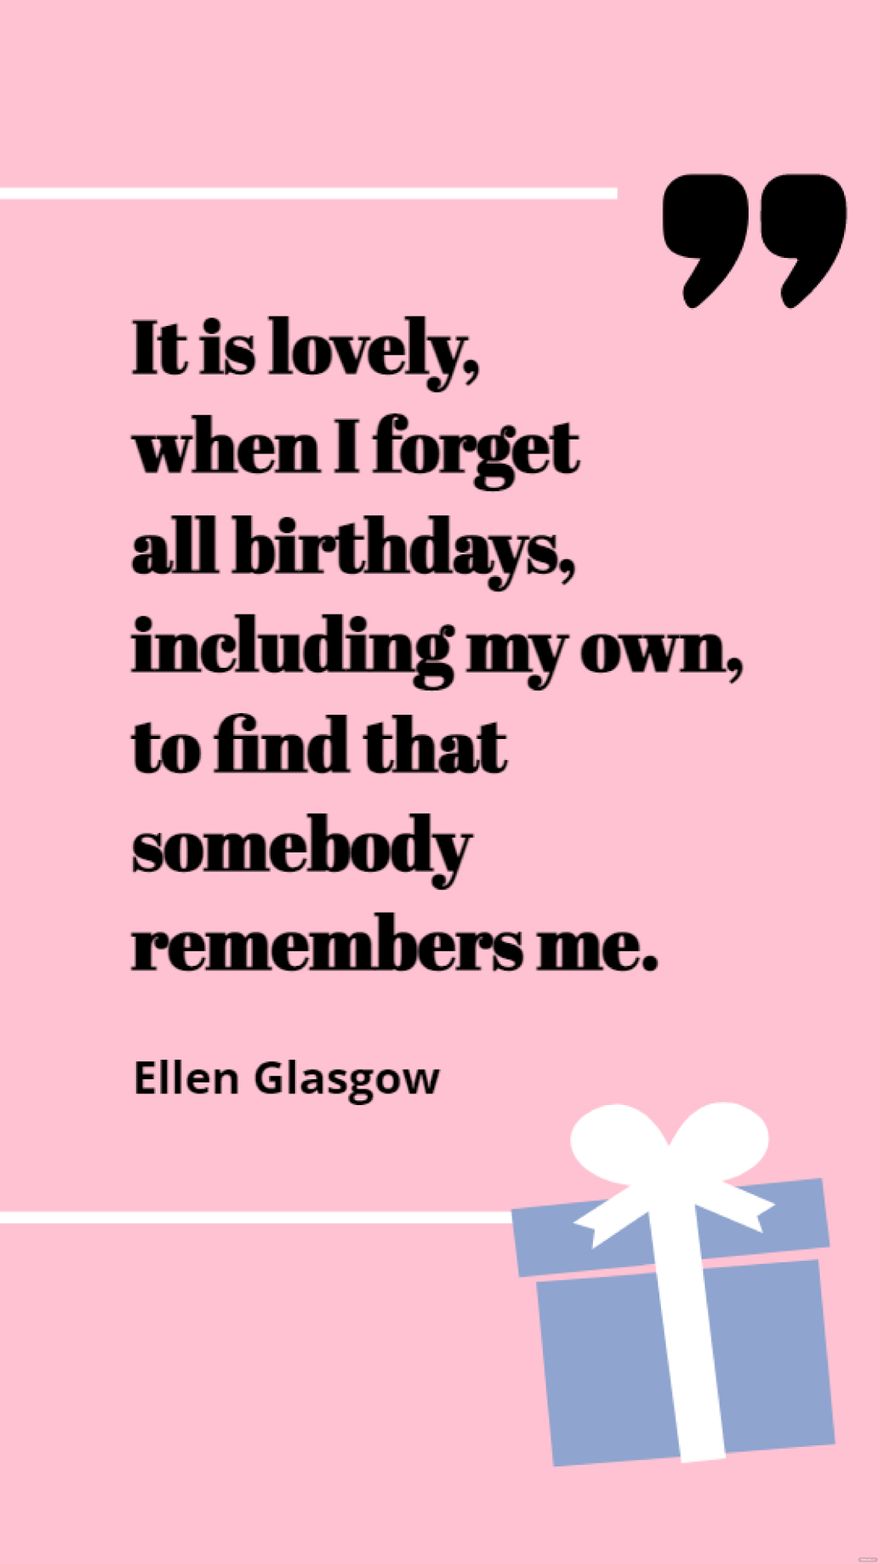 Ellen Glasgow - It is lovely, when I forget all birthdays, including my own, to find that somebody remembers me. in JPG